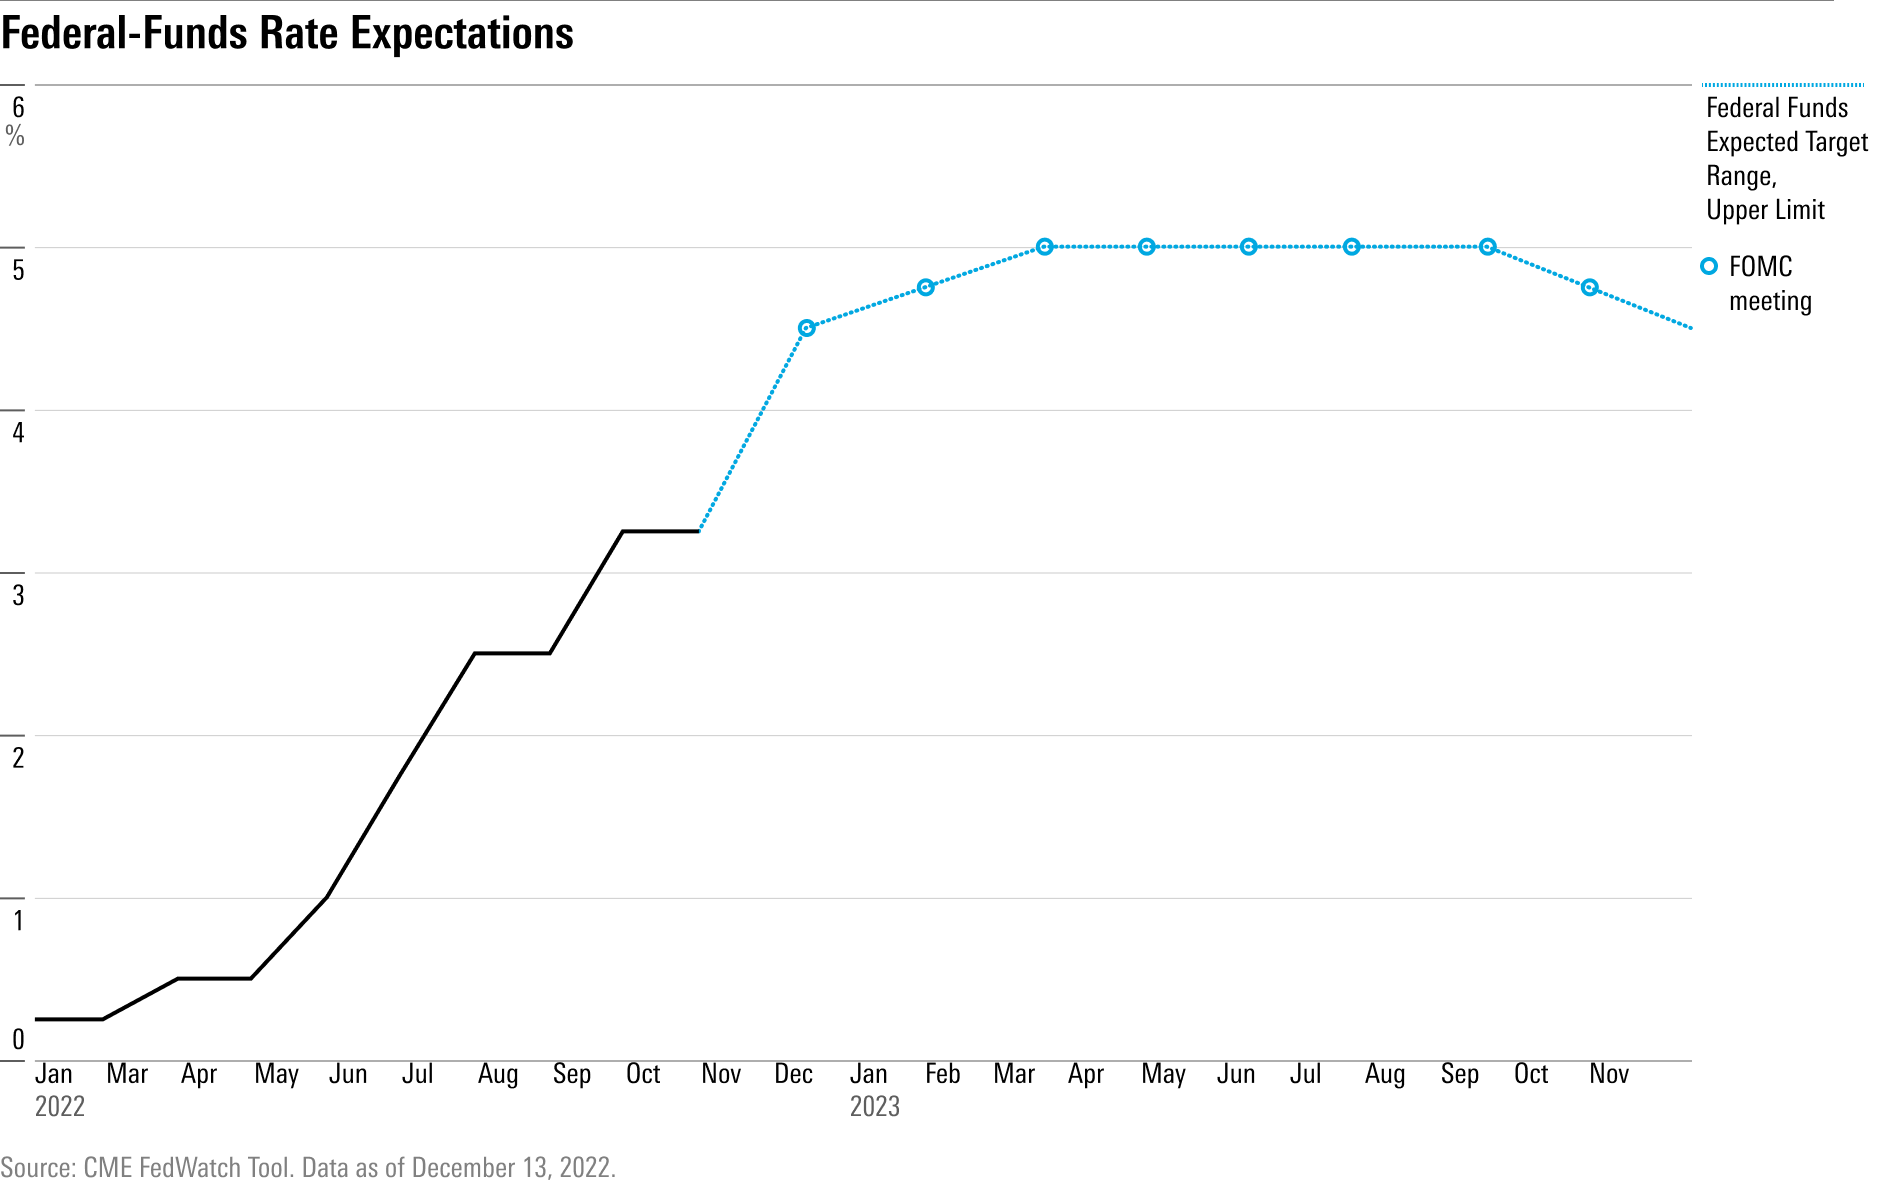 Long-term expectations for the Federal-Funds effective rate.